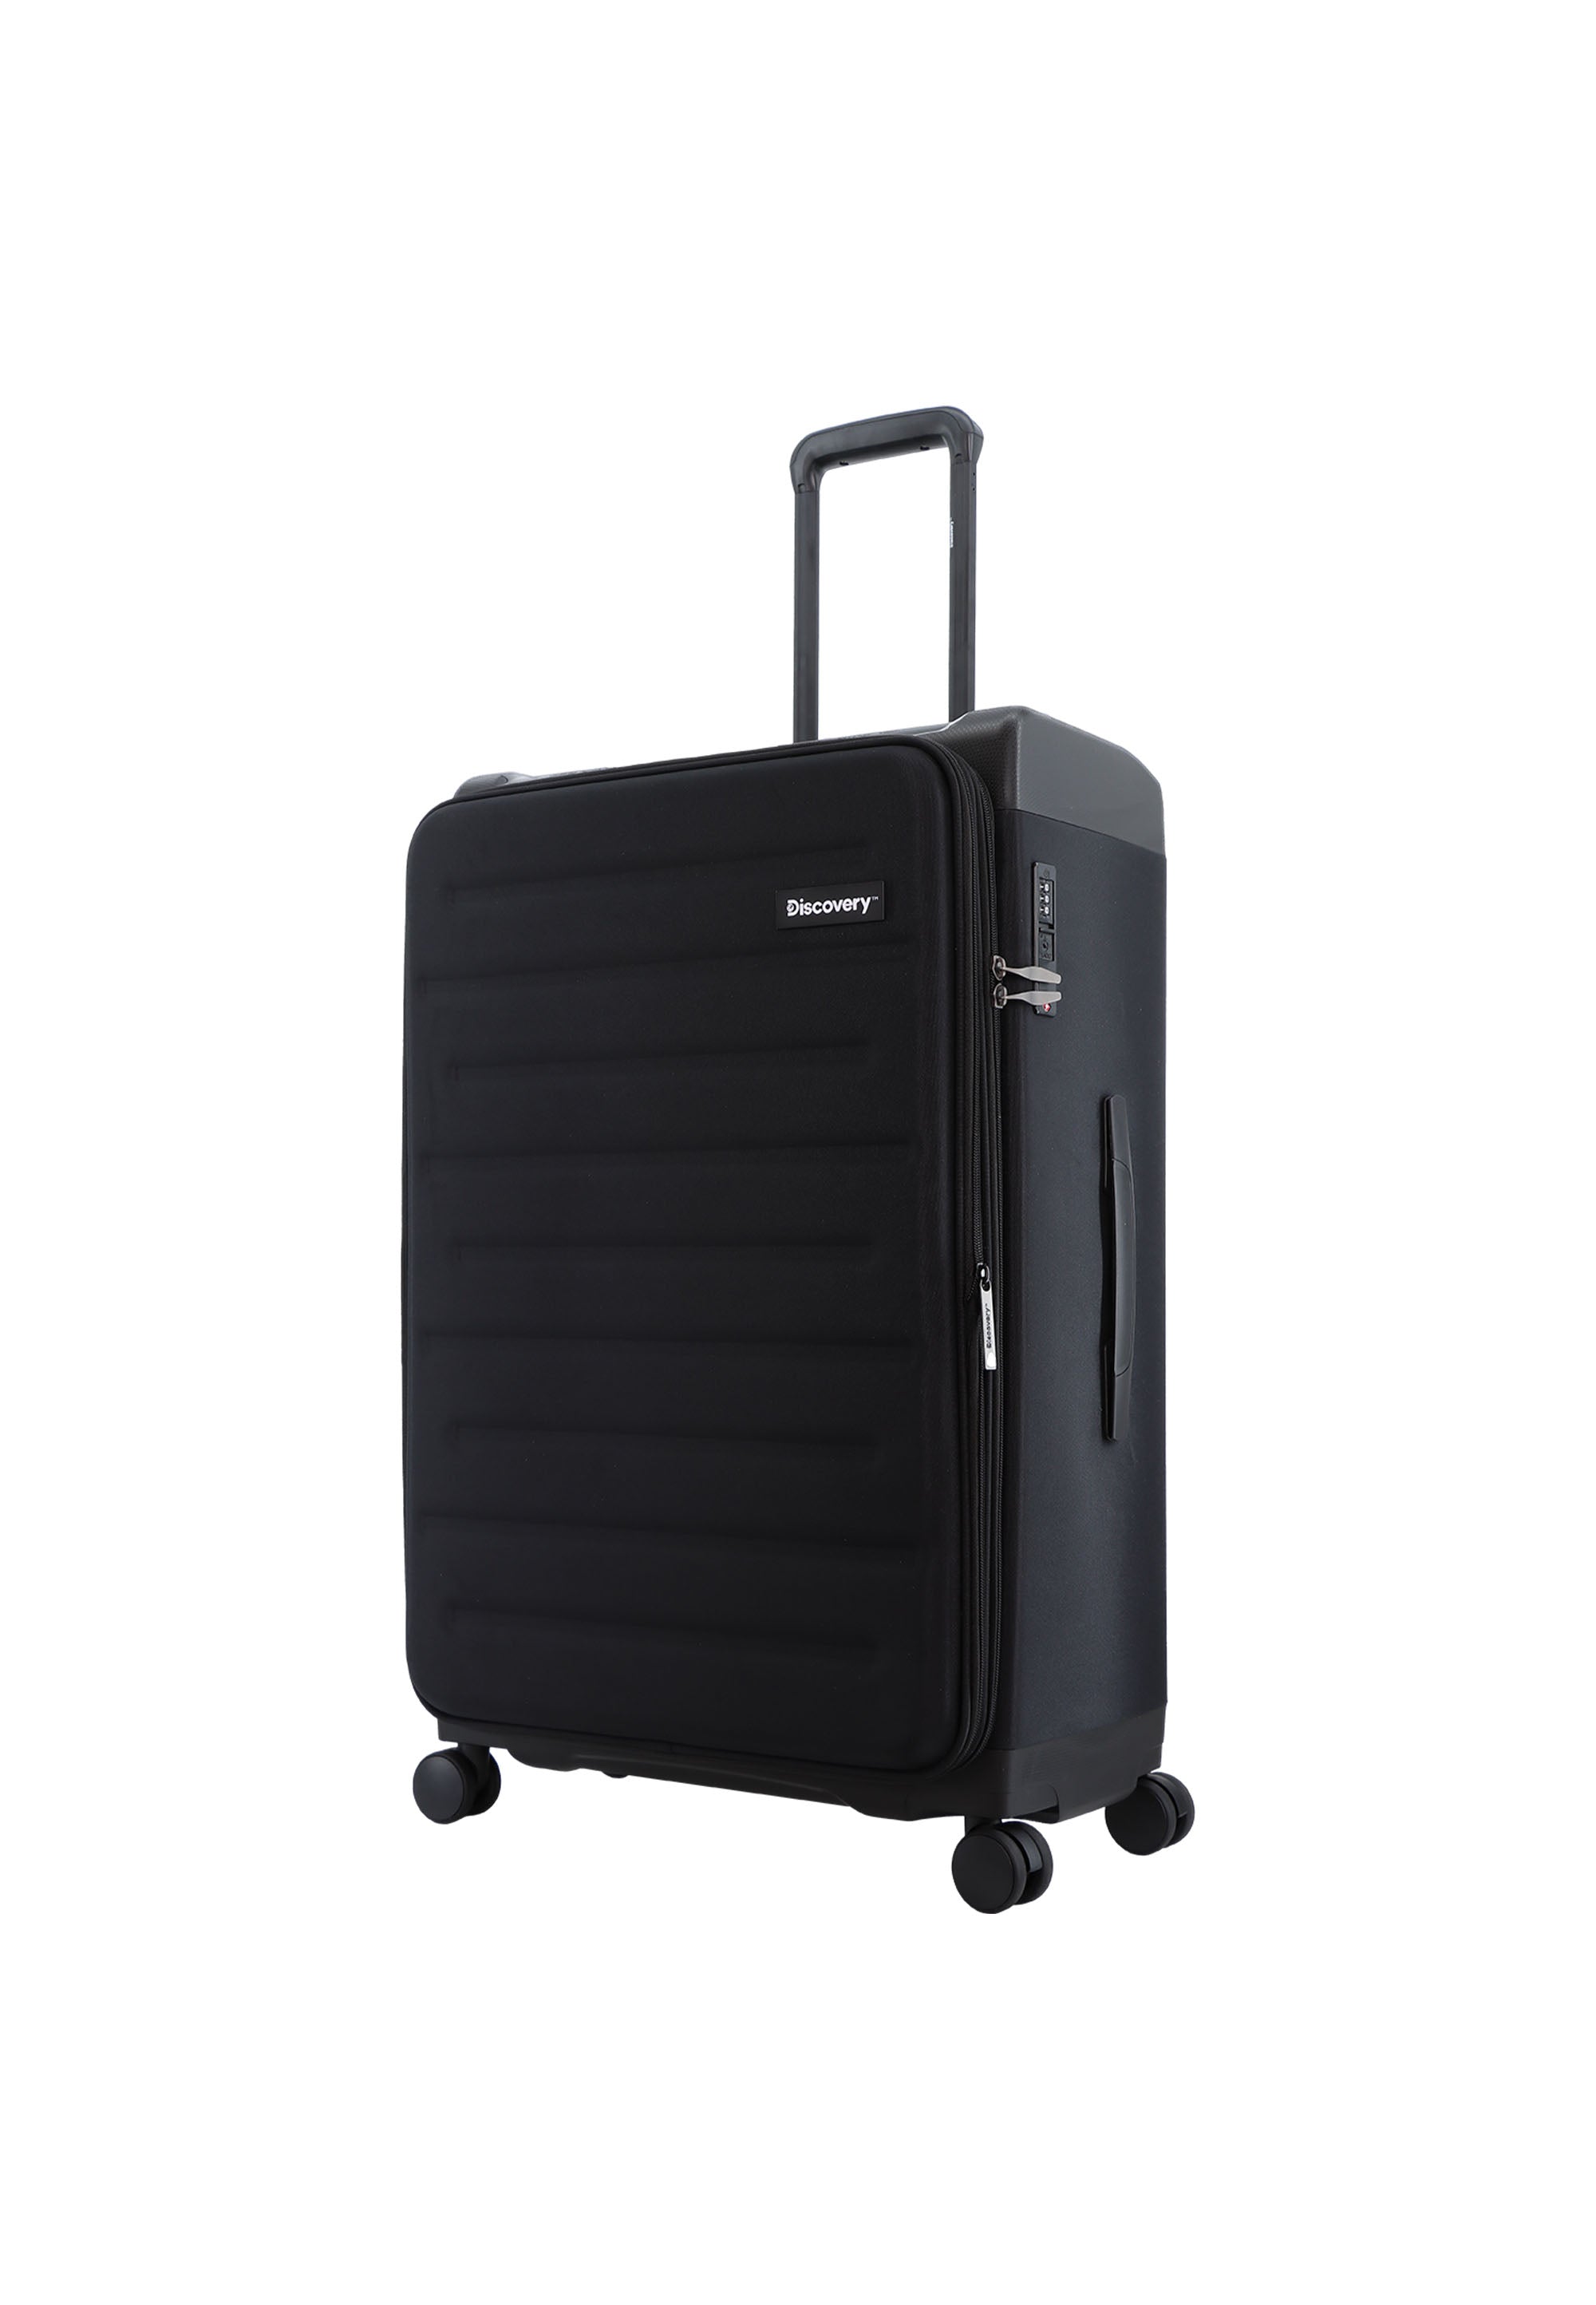 Discovery - Motion Stoffkoffer / Trolley / Reisekoffer - 75cm - (Large)